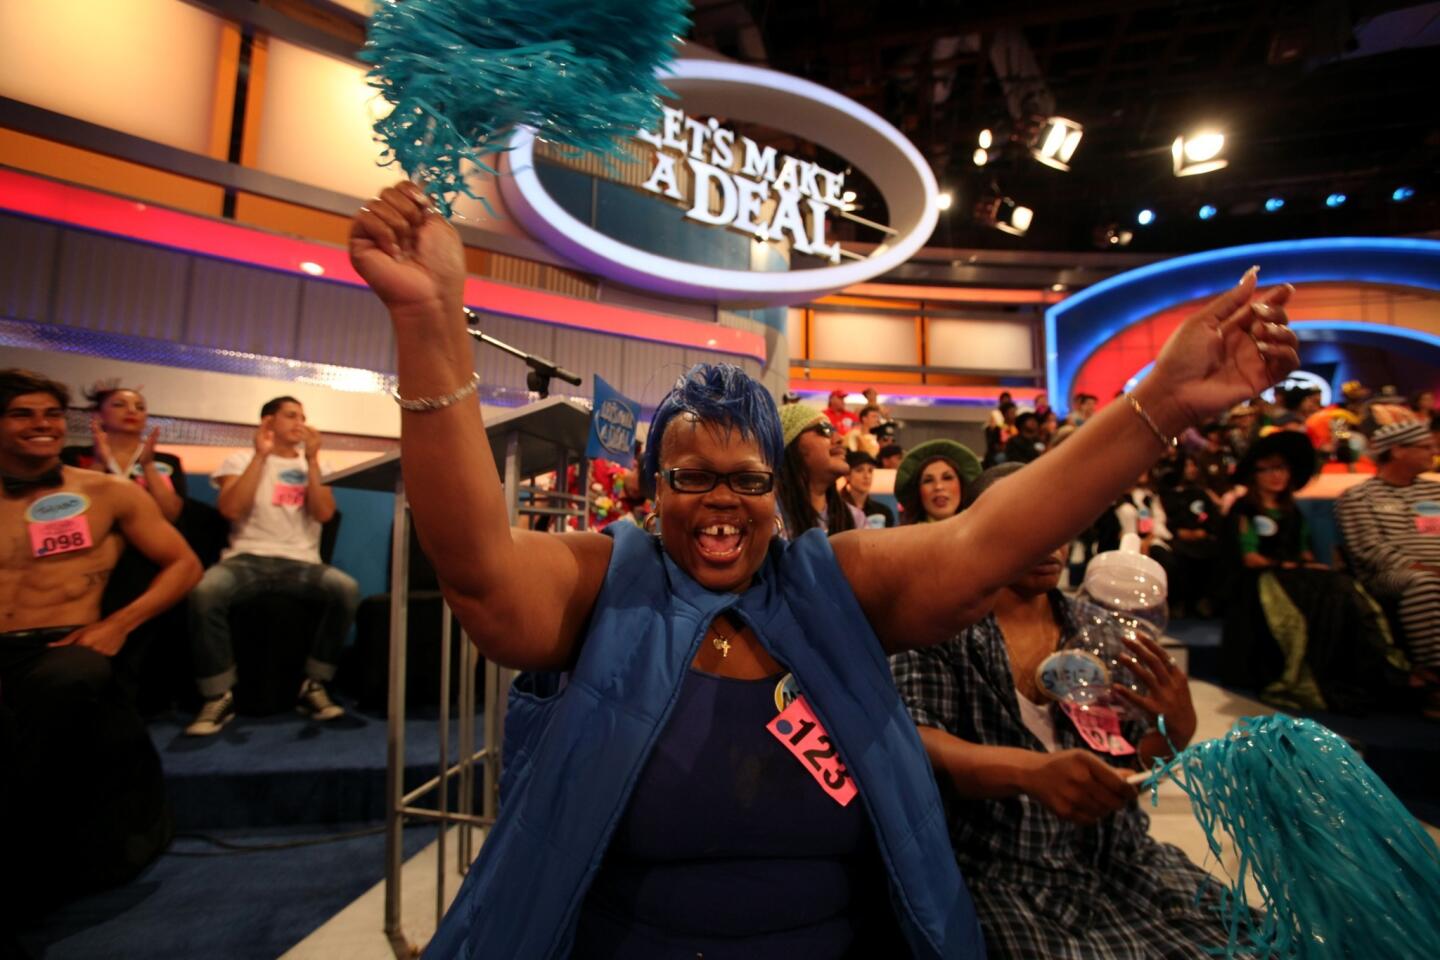 Michelle Cooper, 50, of Los Angeles is part of the colorful audience on the game show "Let's Make a Deal," taped at Sunset Bronson Studios in Hollywood. She says she has watched the program for years.